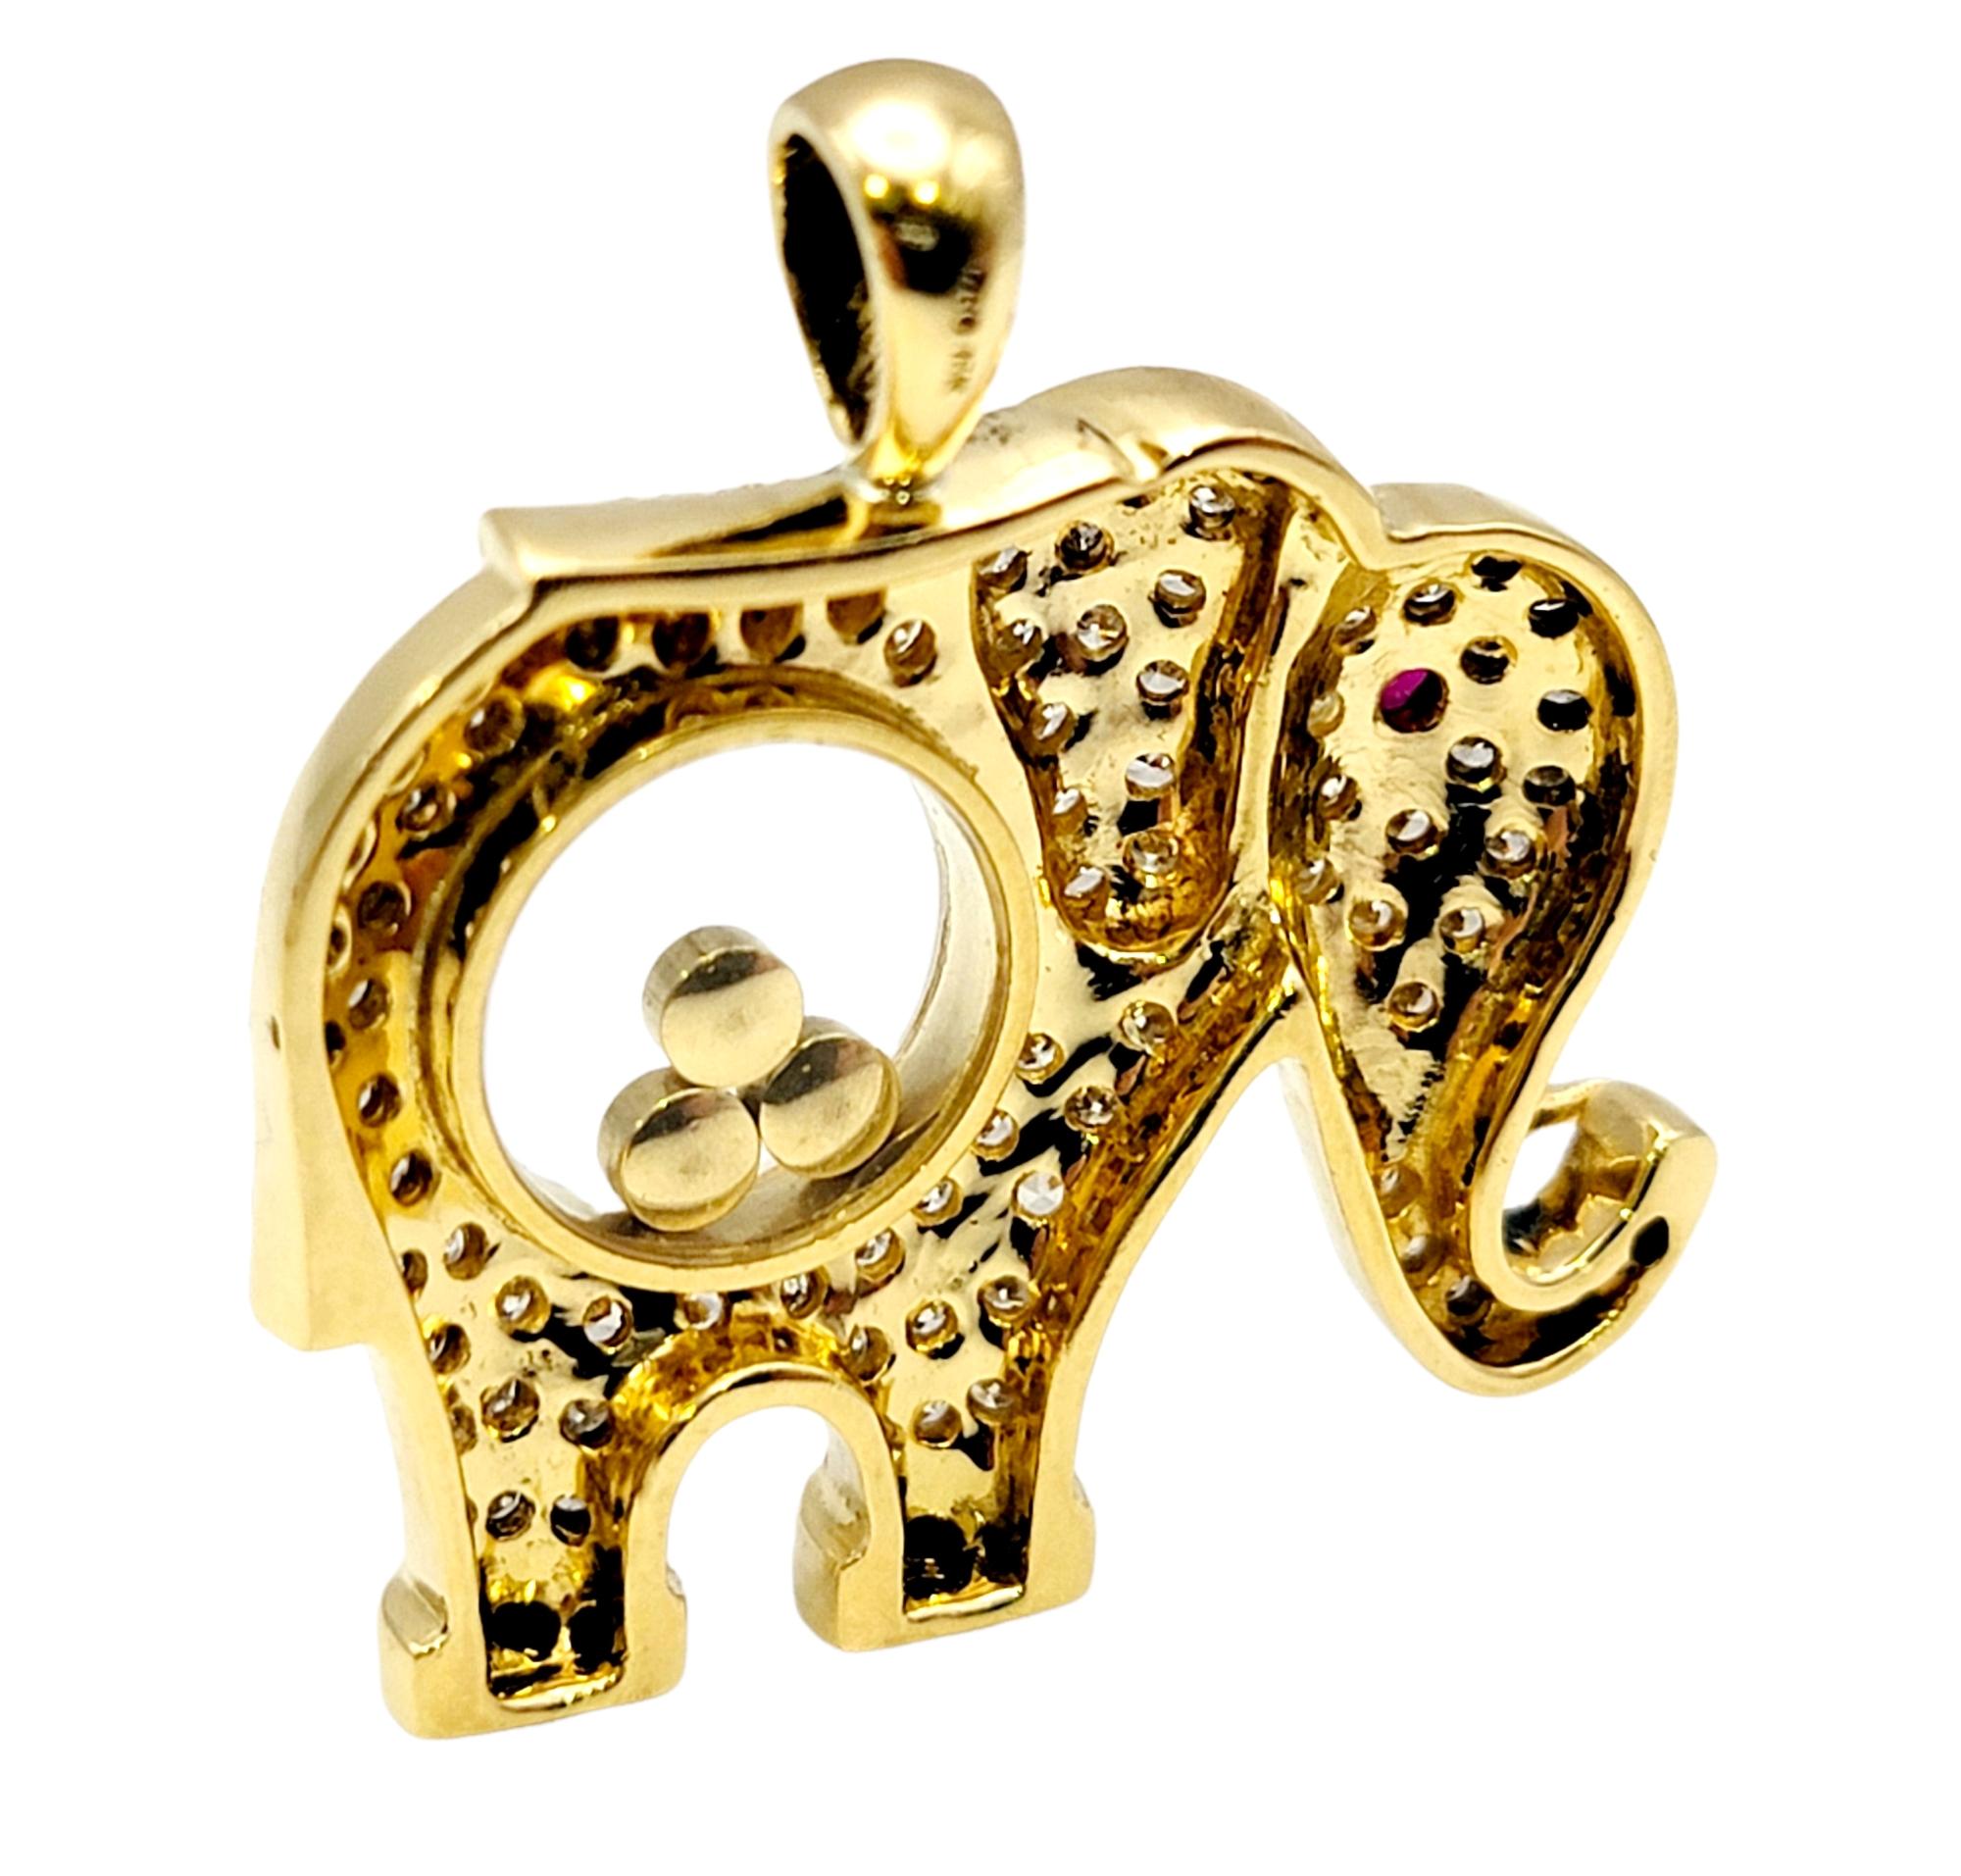 Floating Diamond and Pave Elephant Pendant with Ruby Eye in 18 Karat Yellow Gold 2